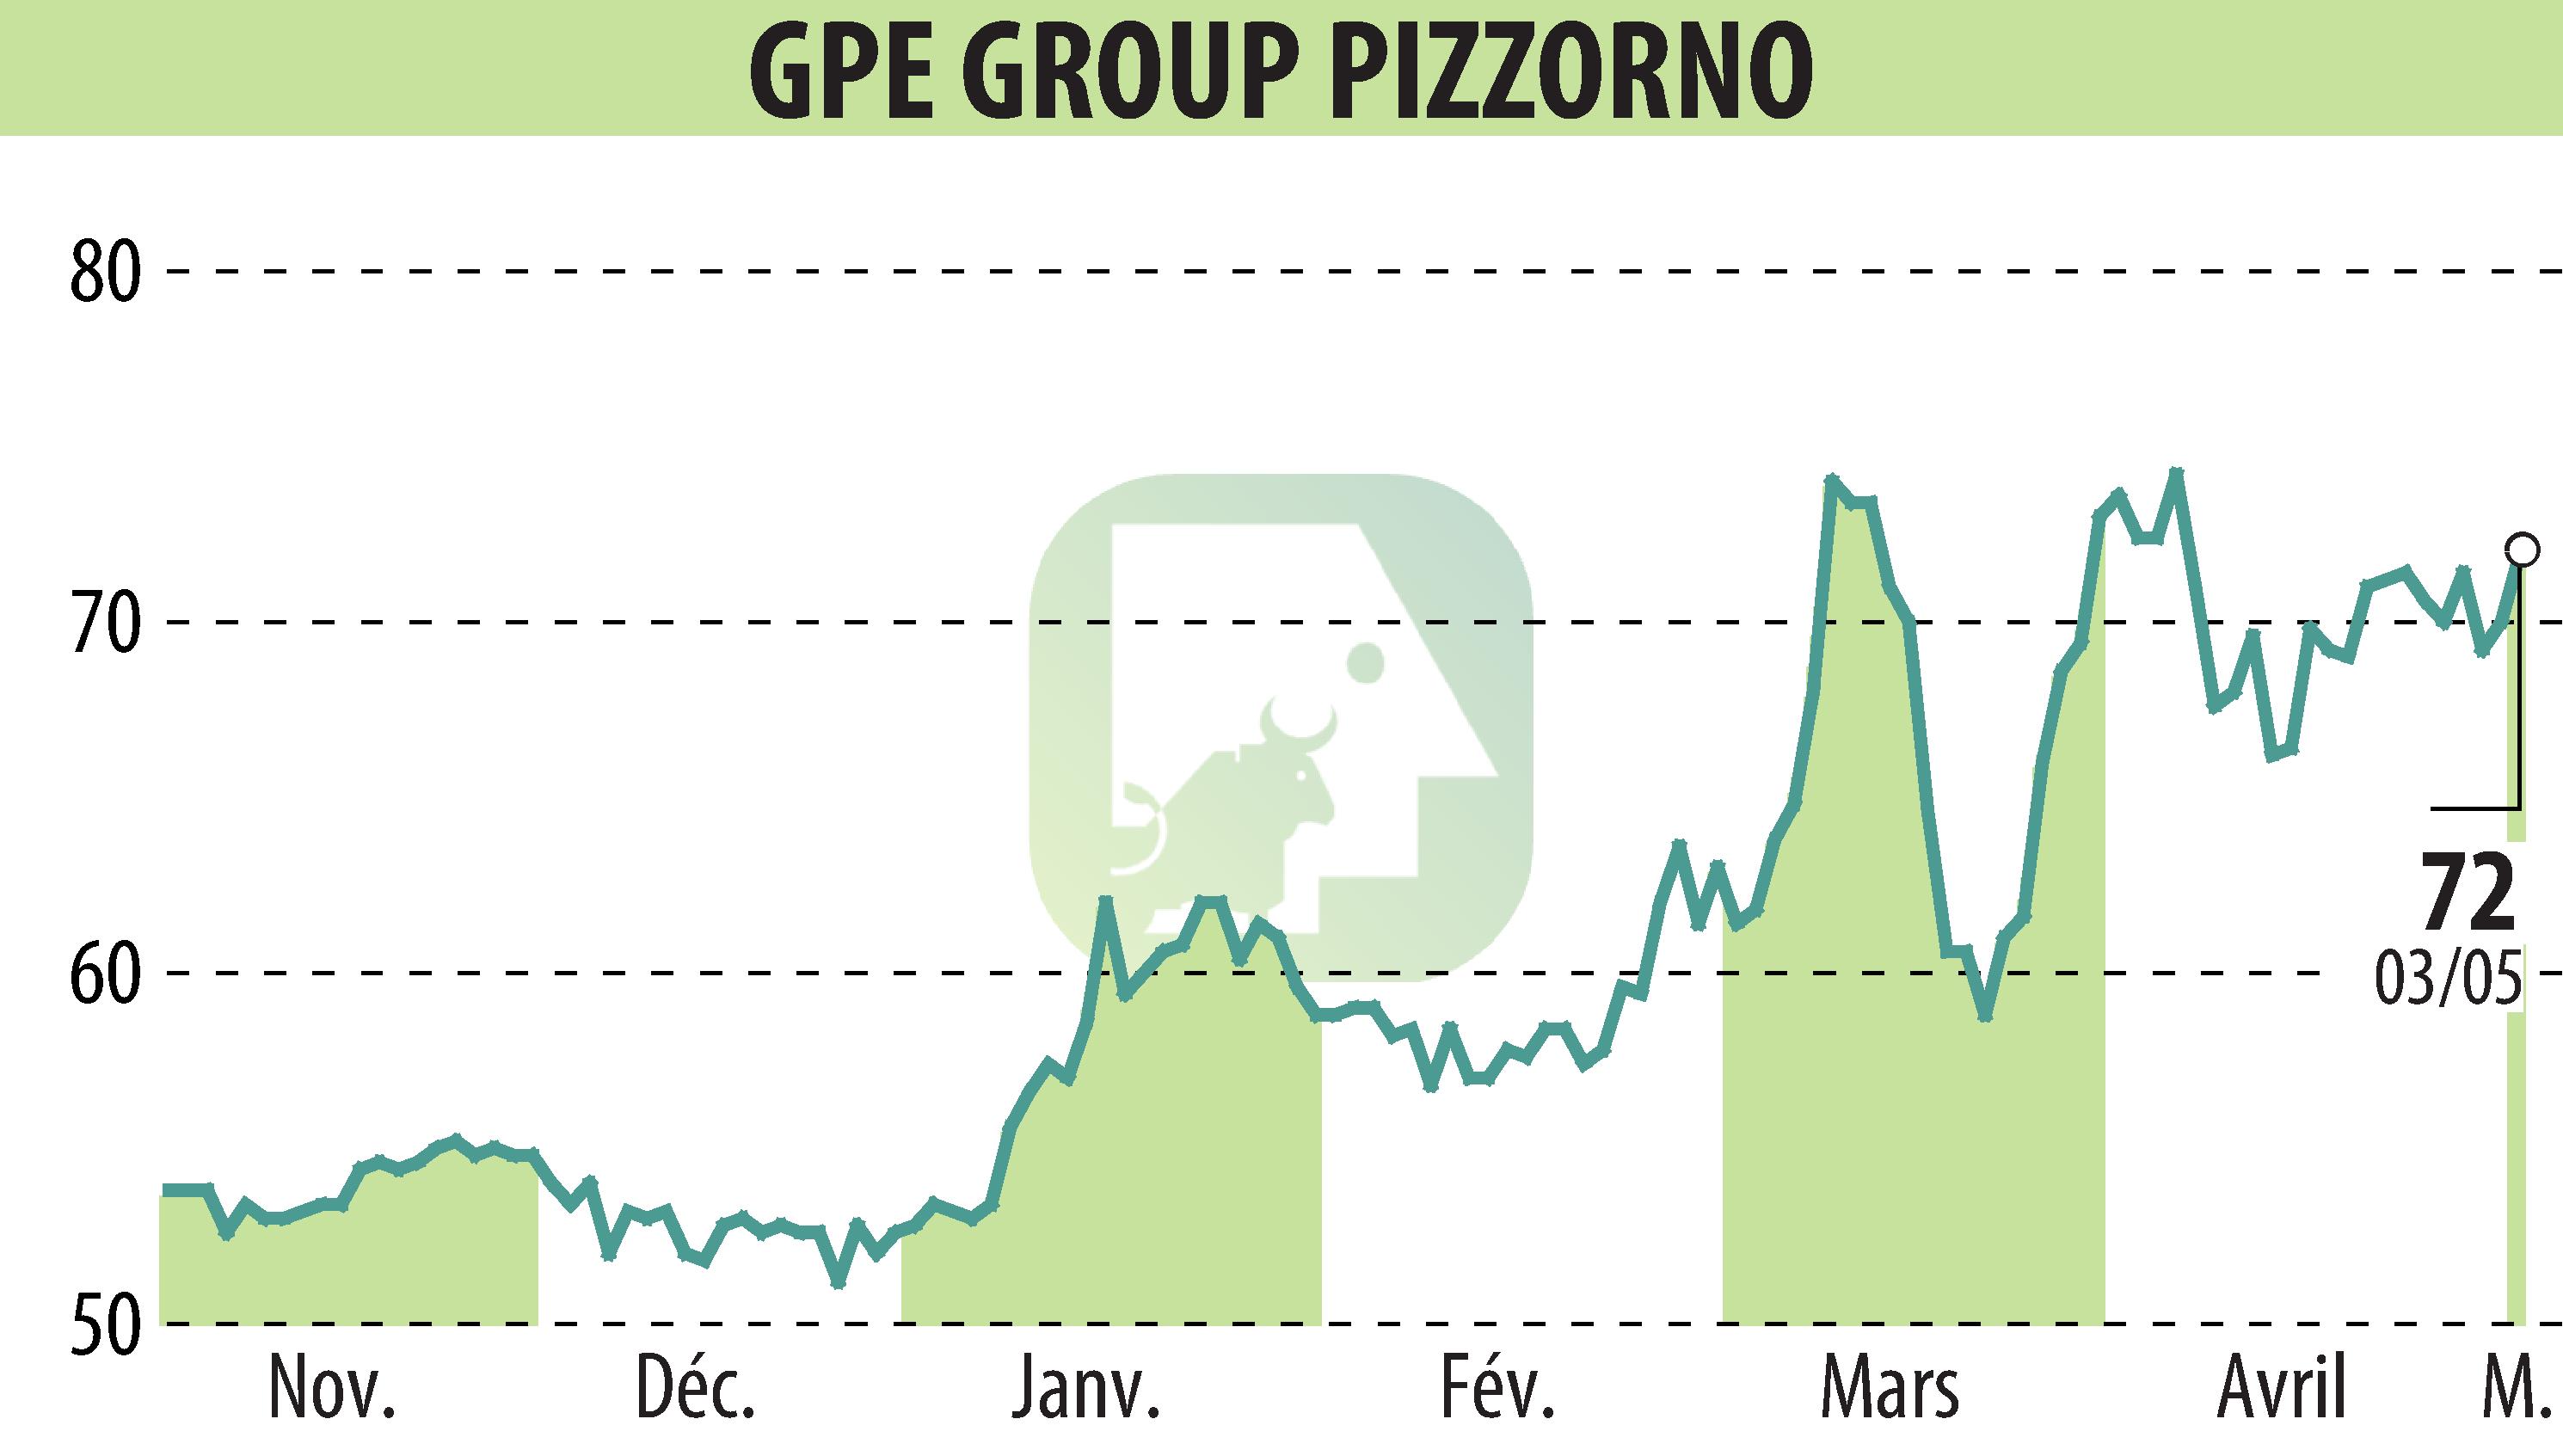 Stock price chart of PIZZORNO (EPA:GPE) showing fluctuations.